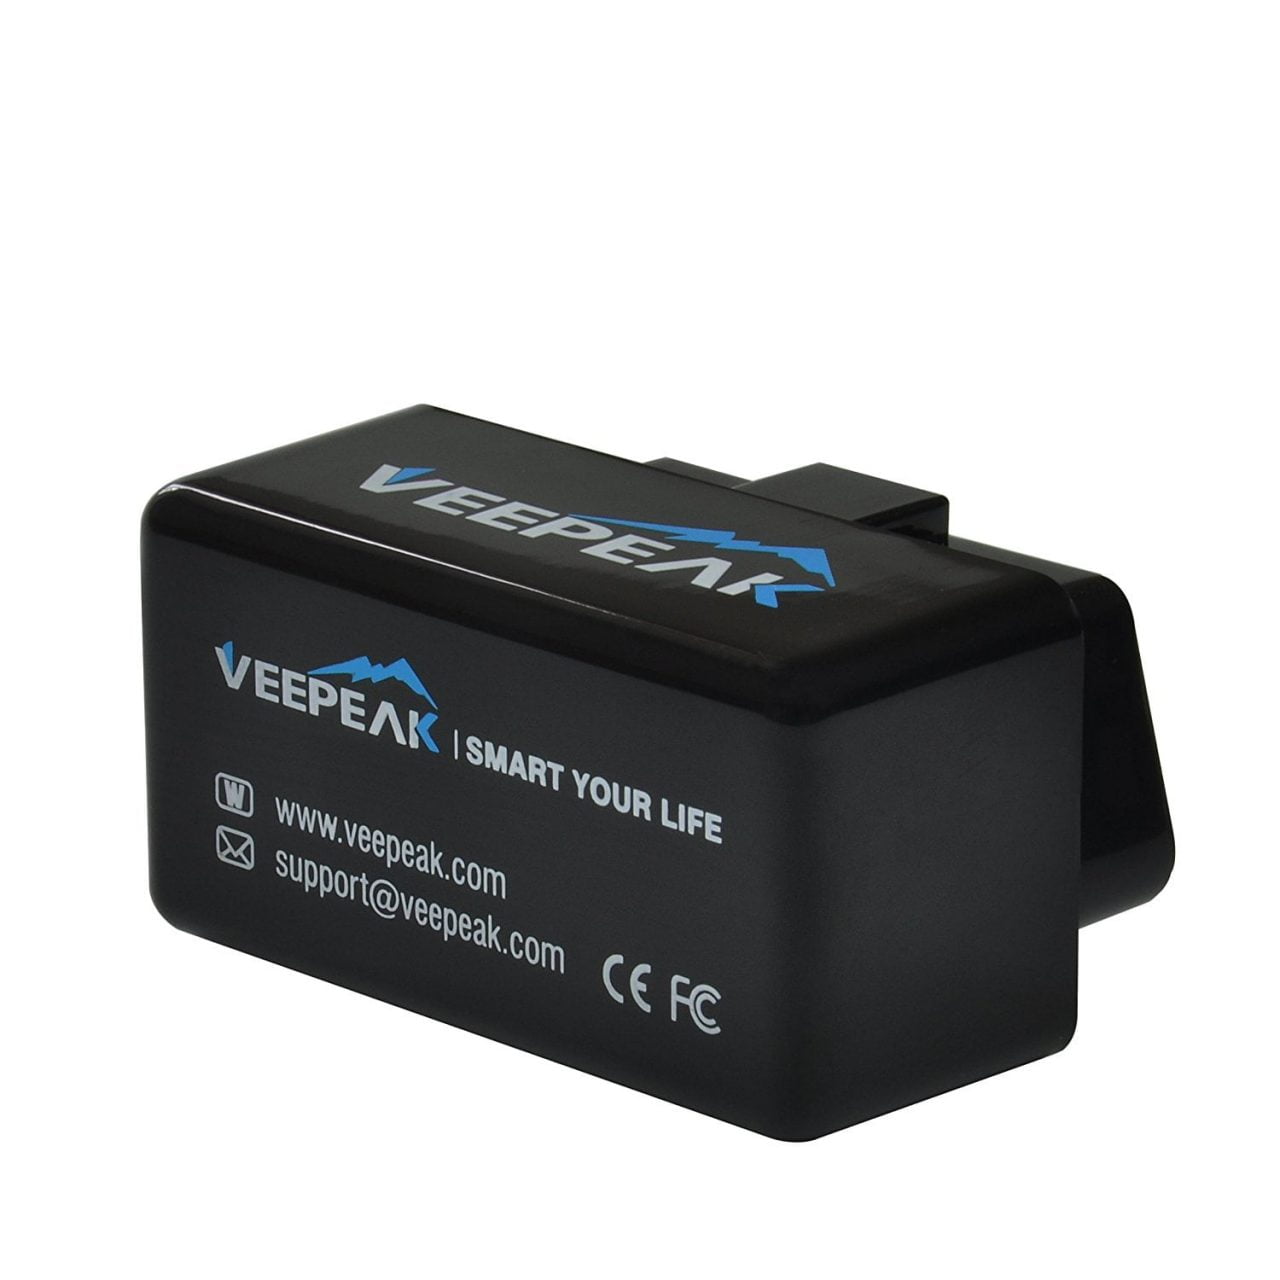 Mini Wifi is a Veepeak OBD2 scanner for DIYers as it offers some great features. However, Car owners can use it, too.